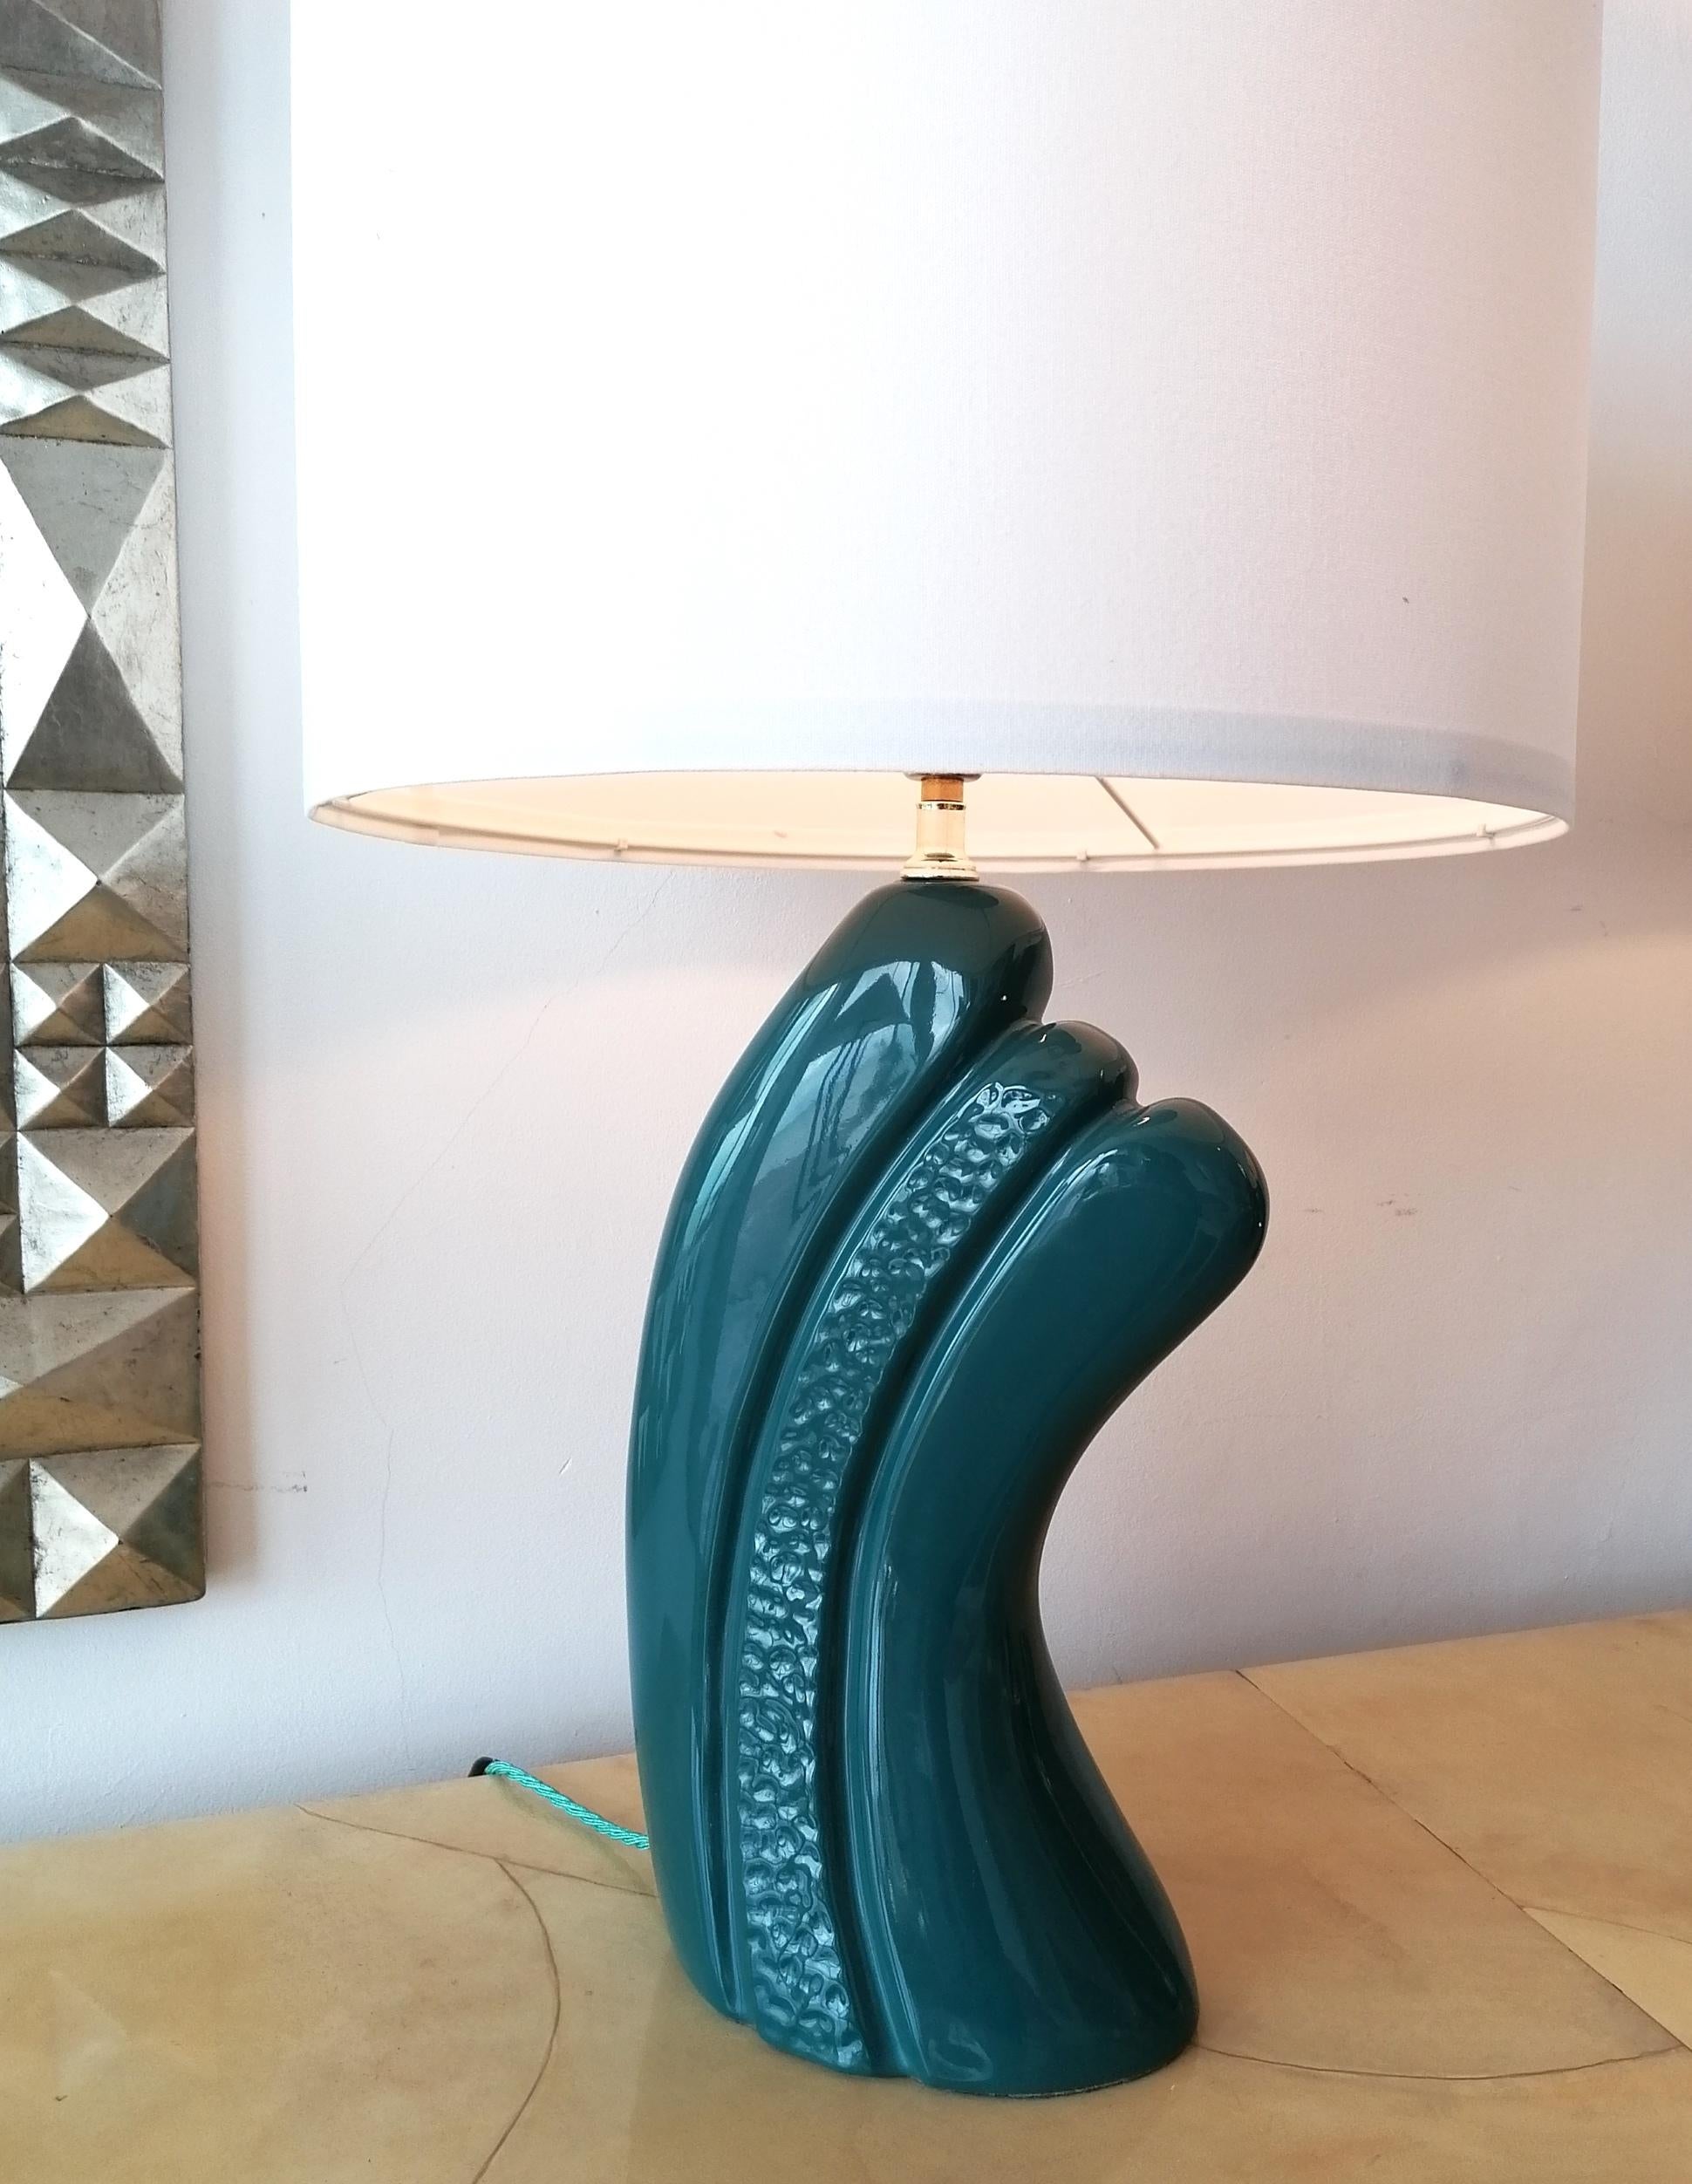 Late 20th Century Pair of Dark, Intense Blue / Green Ceramic Lamps, USA 1980s Art Deco Revival For Sale